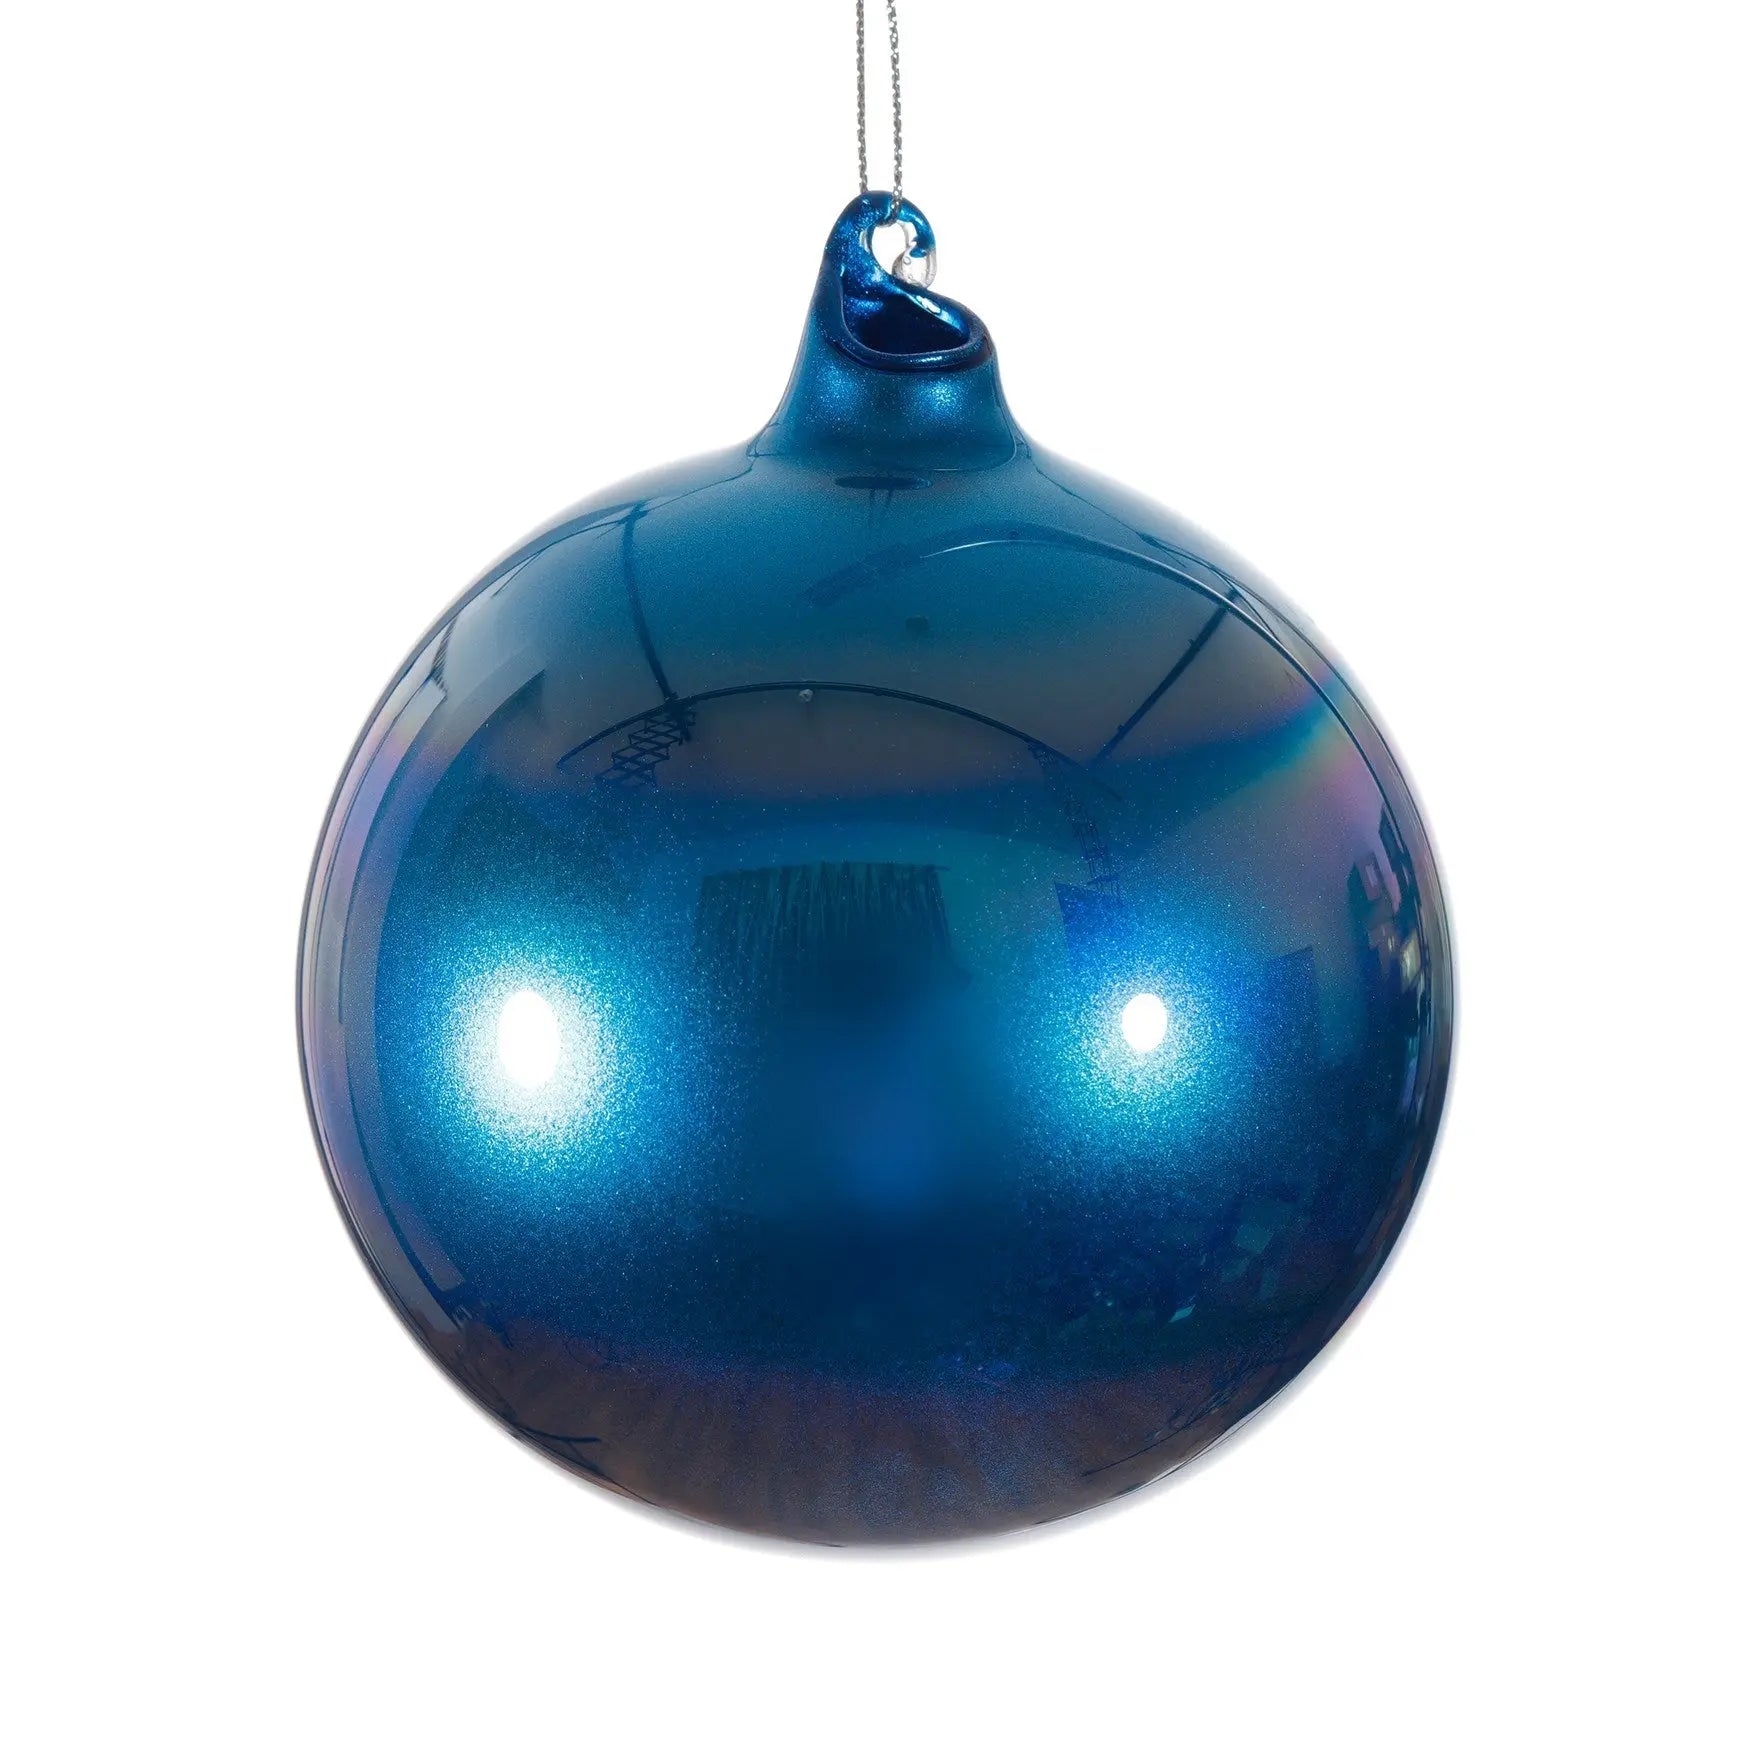 Jim Marvin Pearl Glass Ornament in Blue - Home Smith